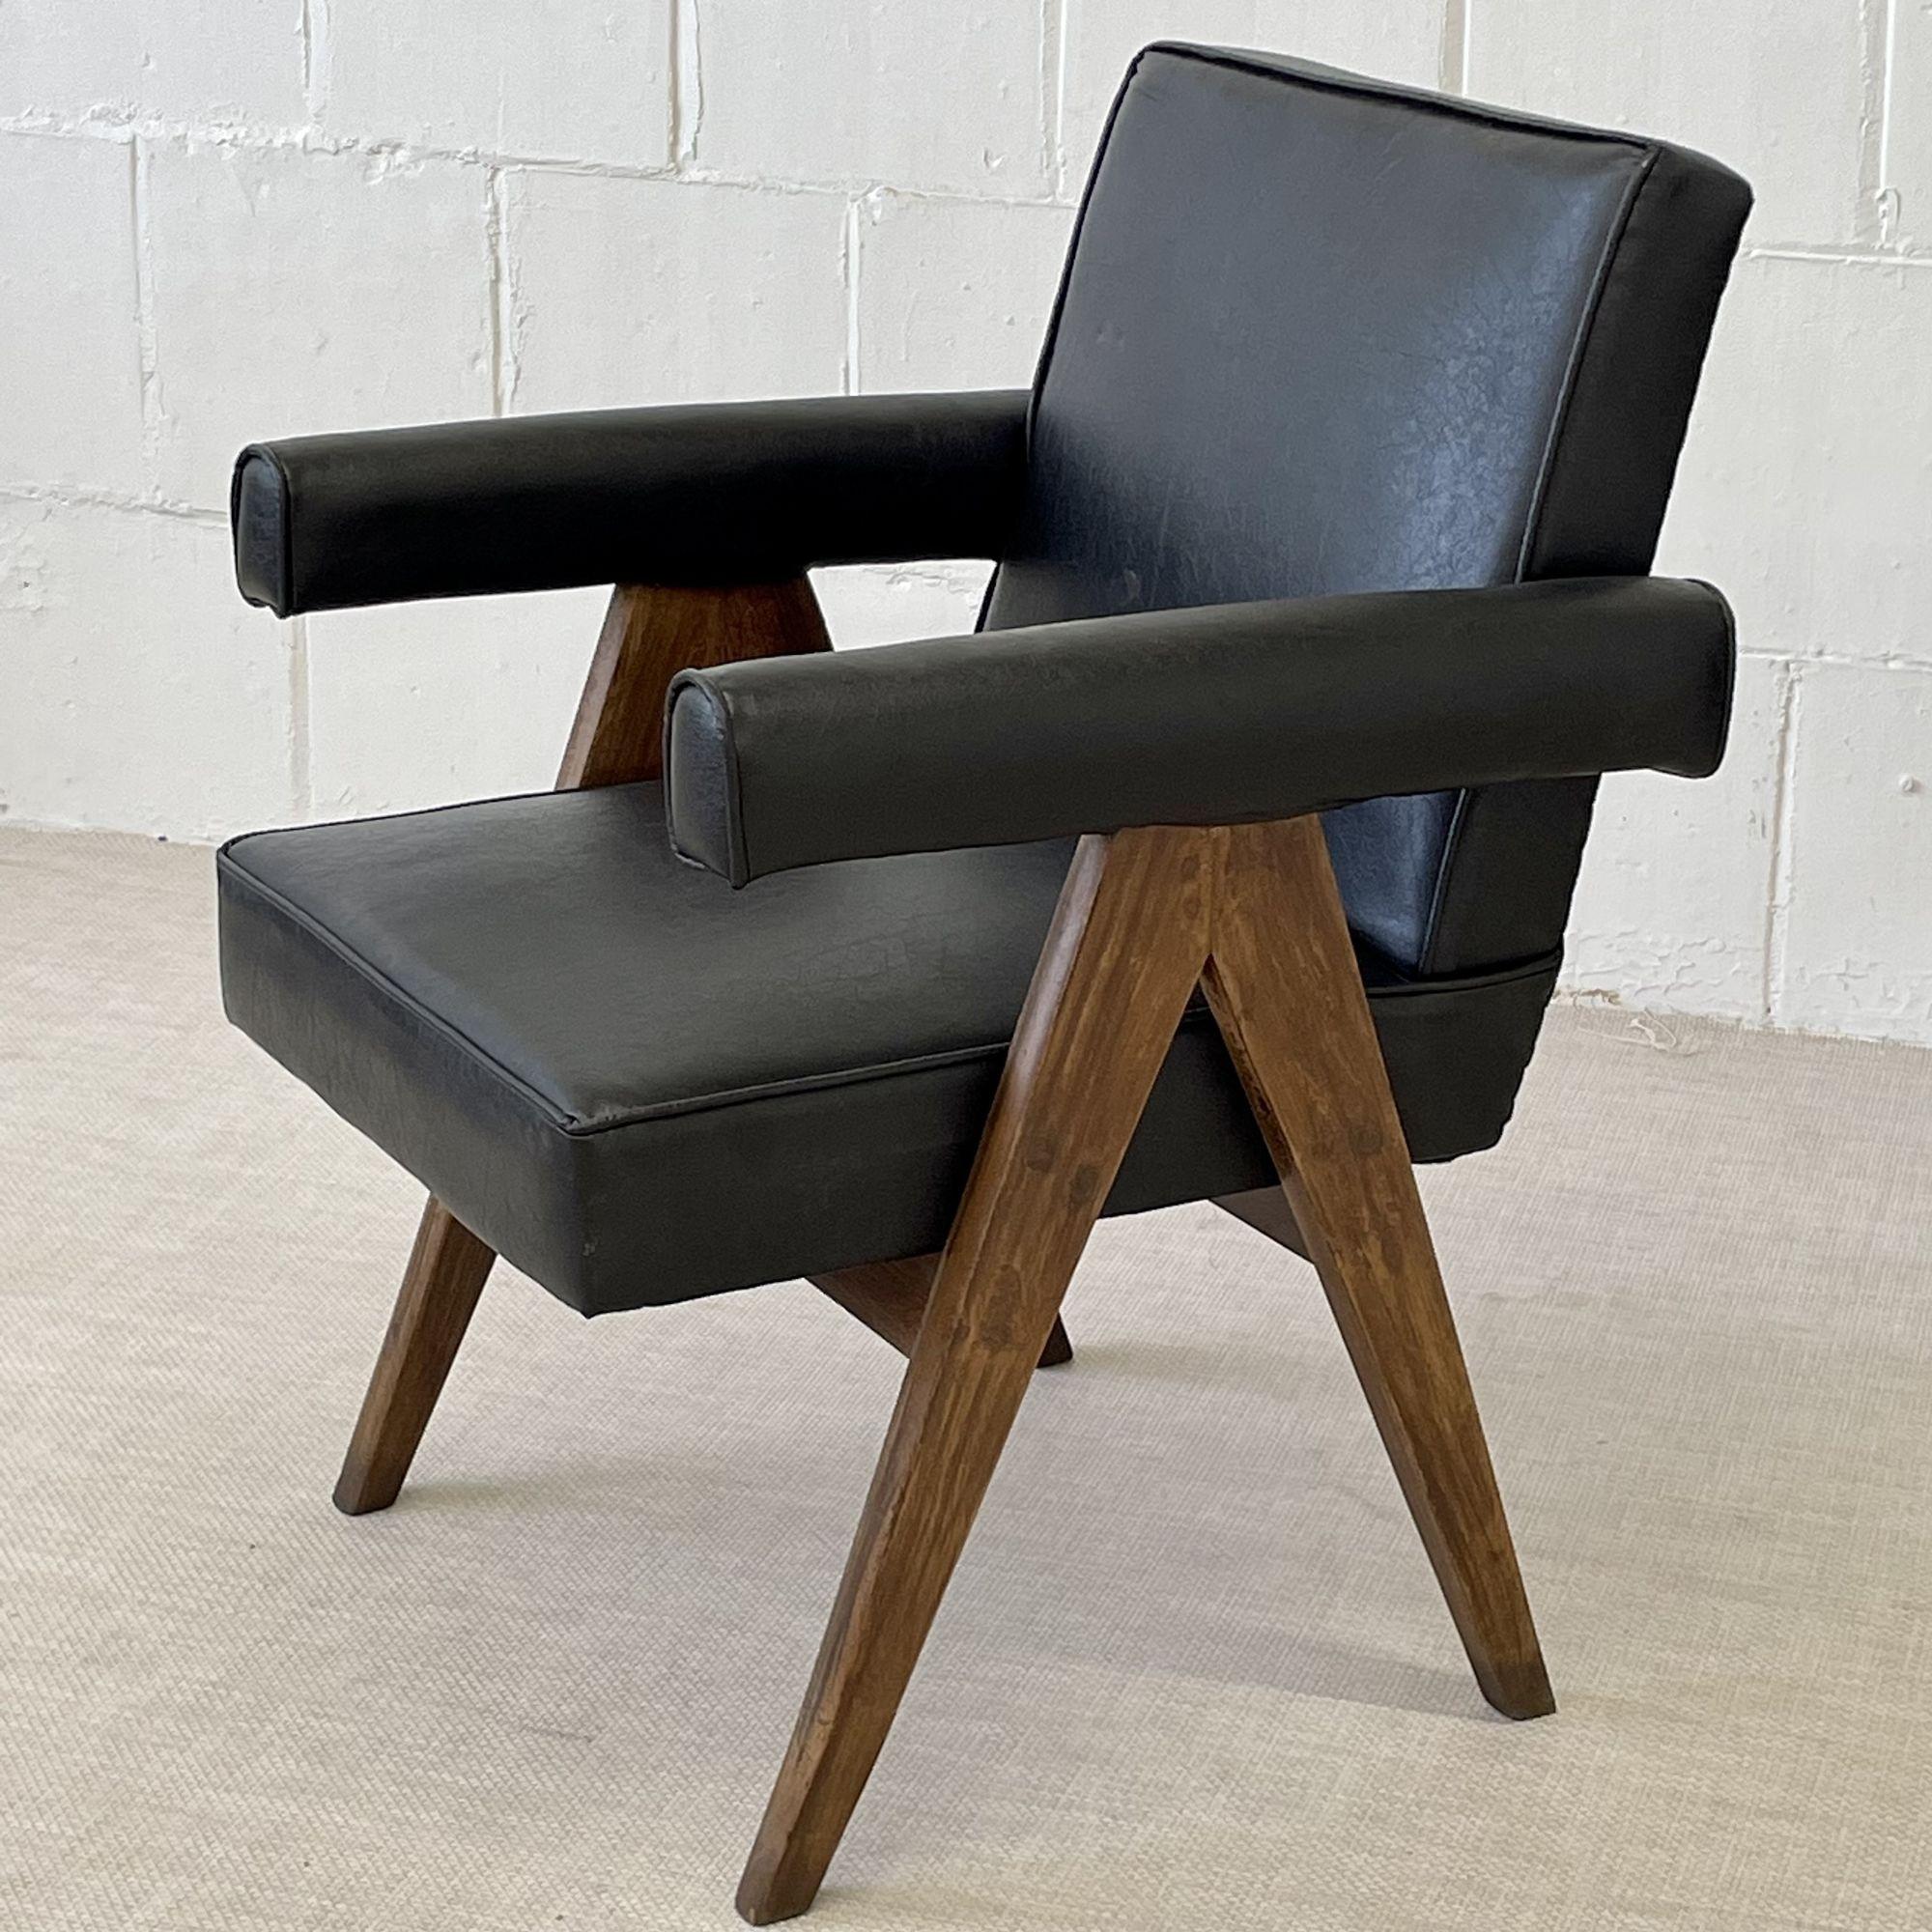 Cane Pair of Pierre Jeanneret Committee Chairs, Mid-Century Modern, Teak